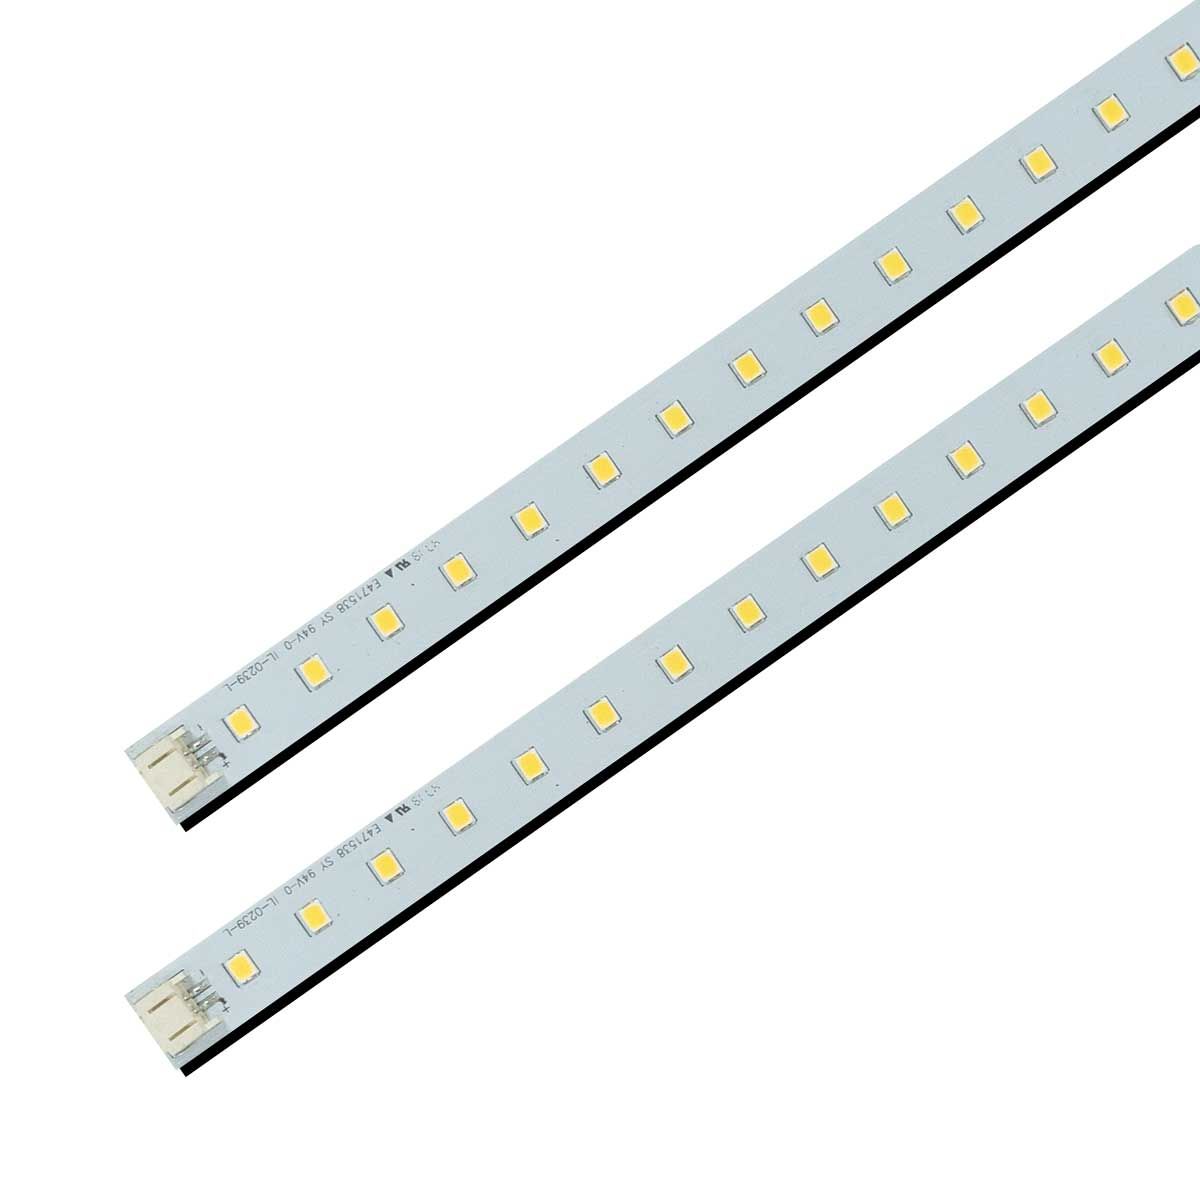 Fluorescent Lights To Led, How To Replace Cover On Fluorescent Light